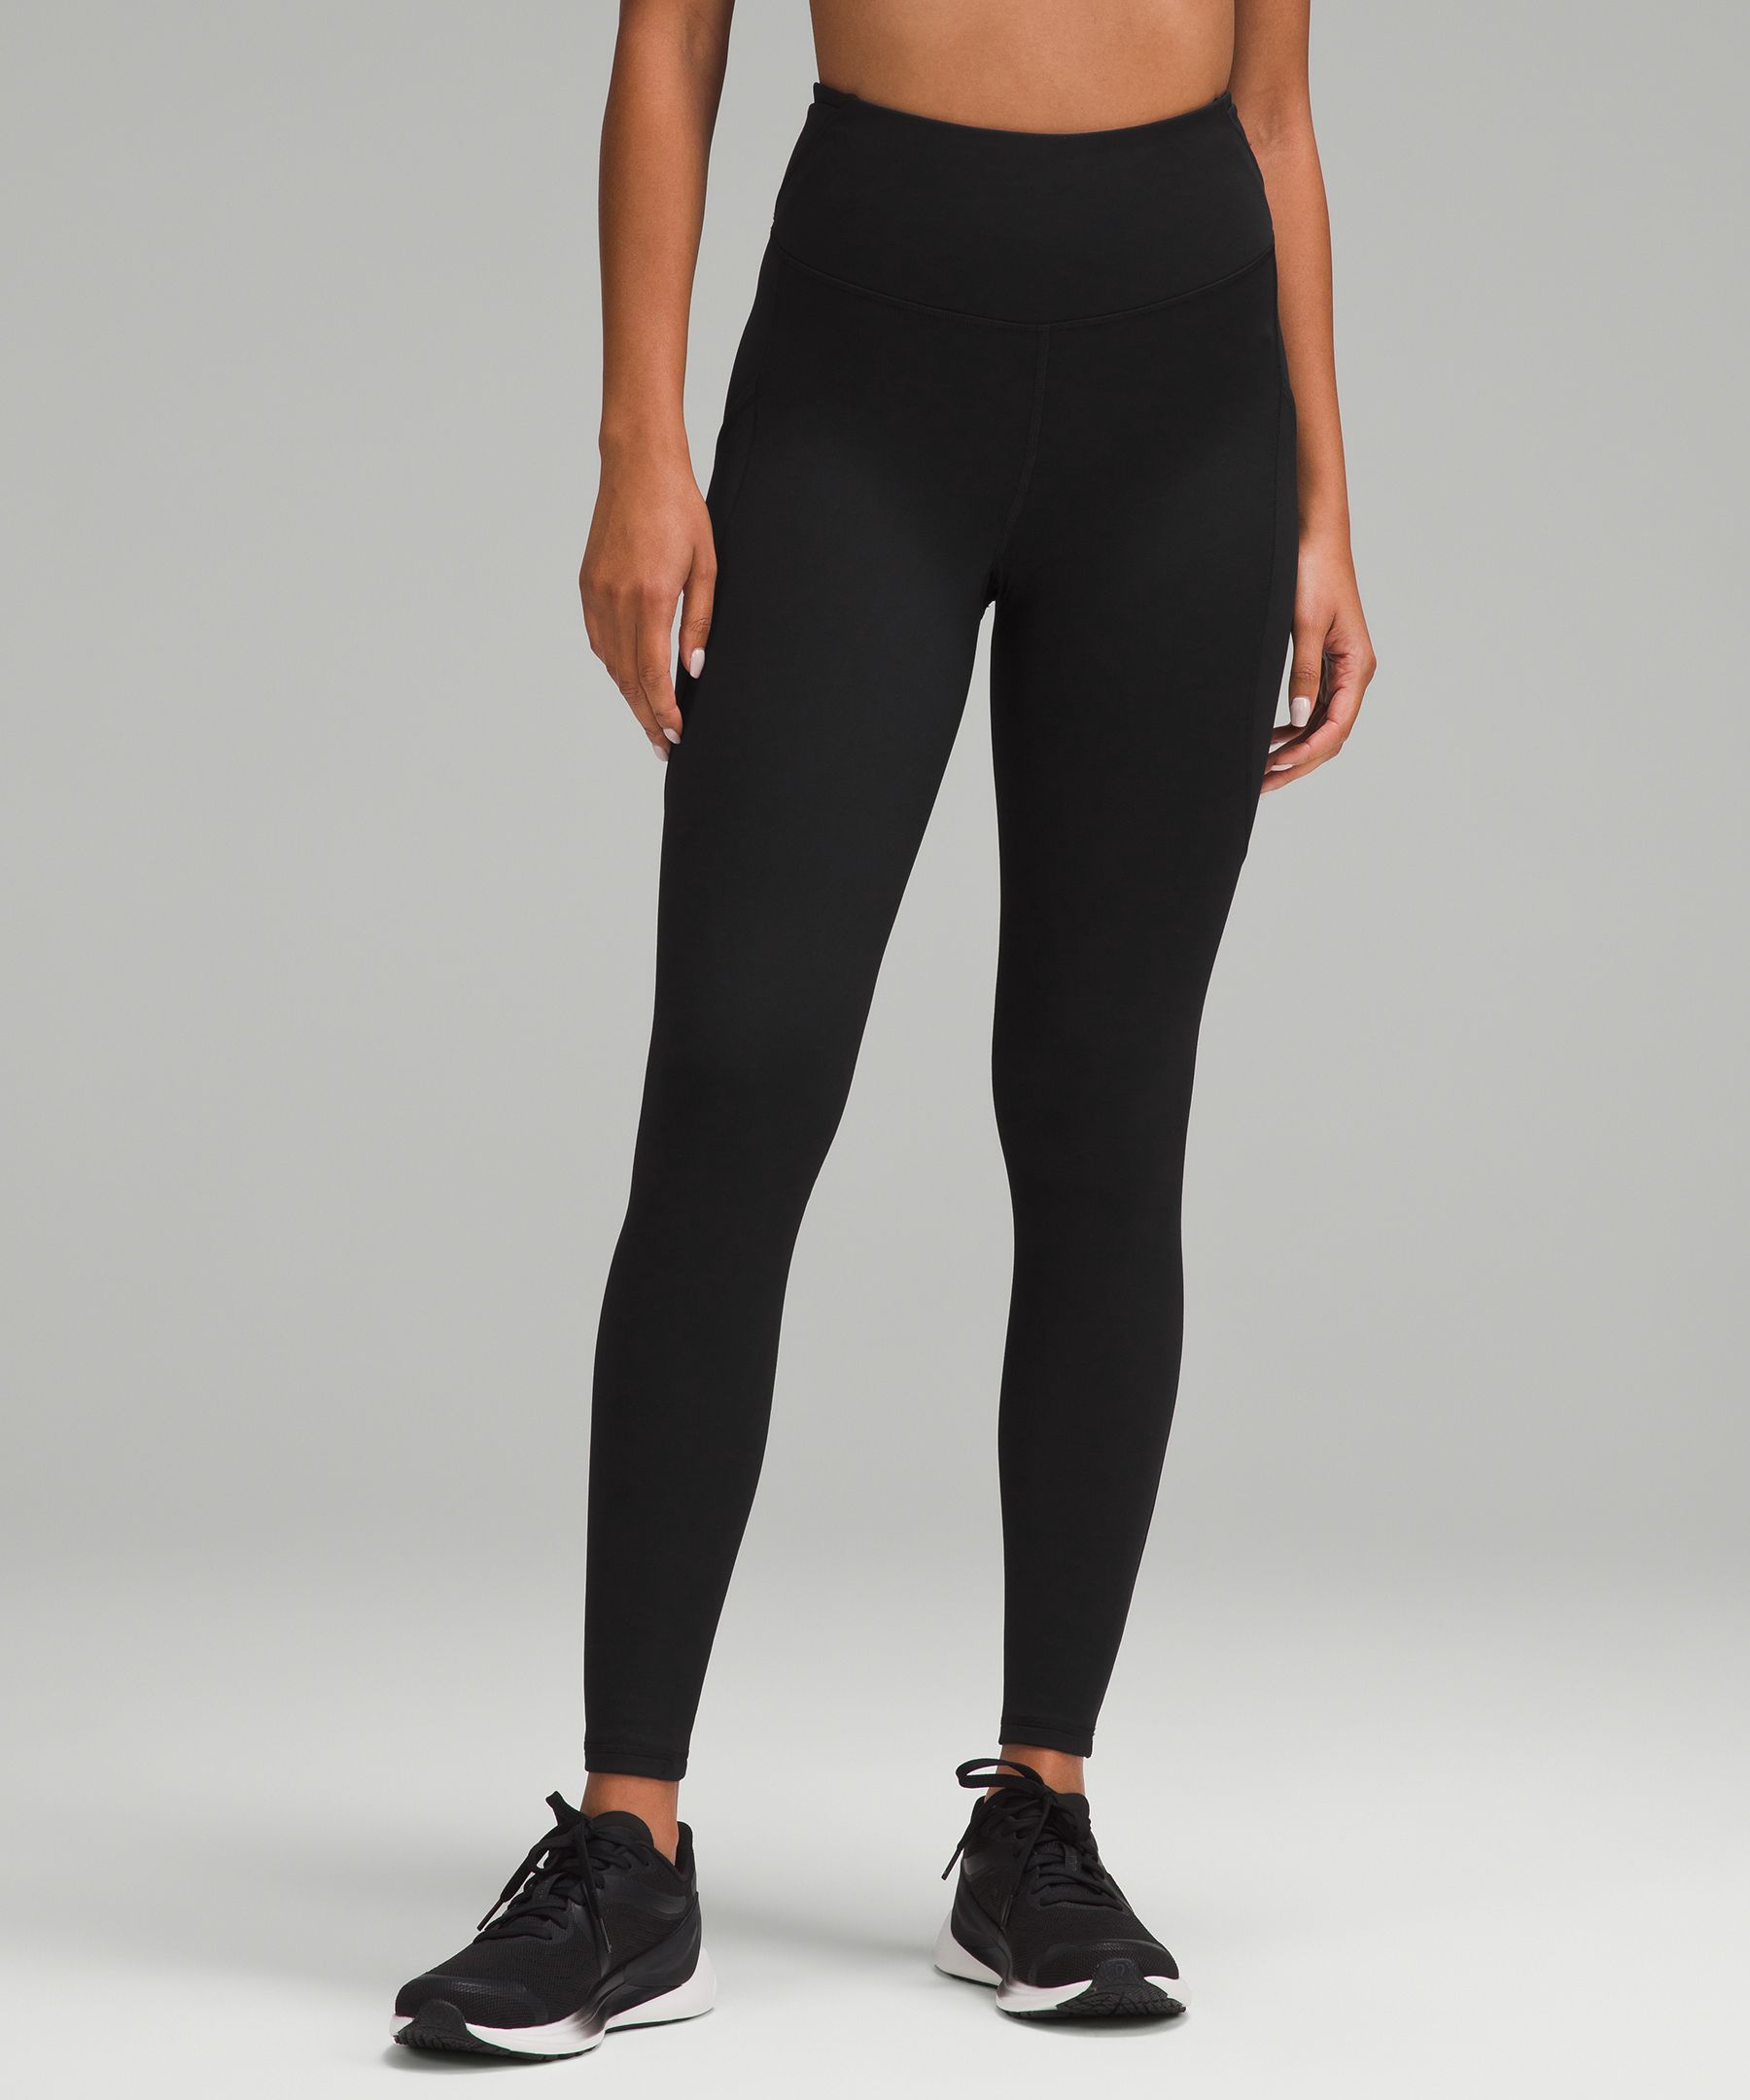 Nike Fast Women's Mid-Rise 7/8 Graphic Leggings with Pockets. Nike CA